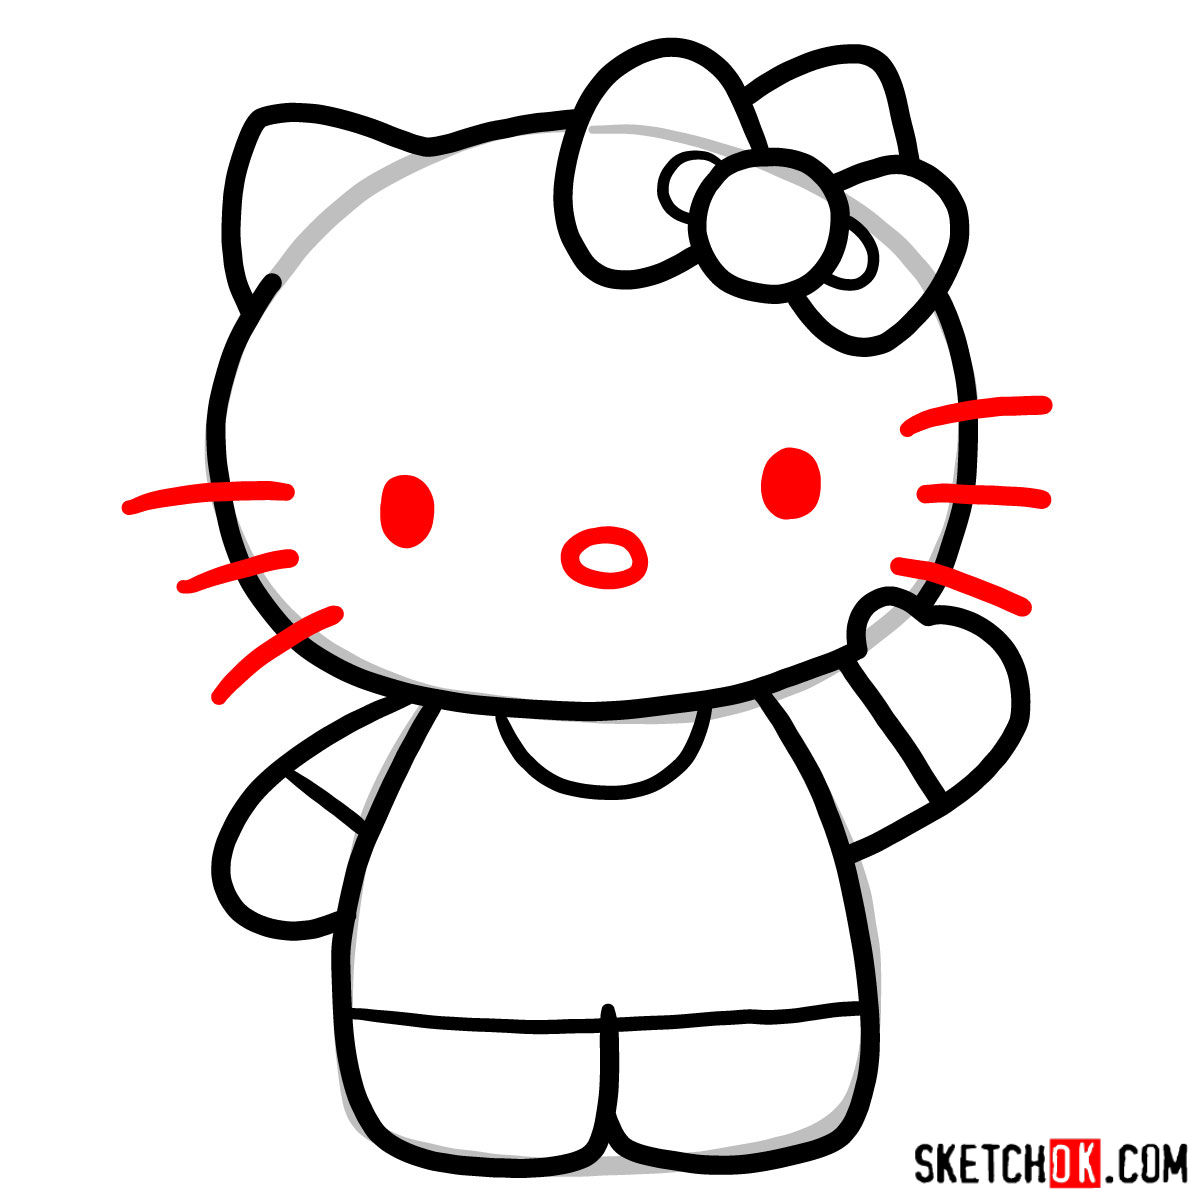 How to draw Hello Kitty - step 06